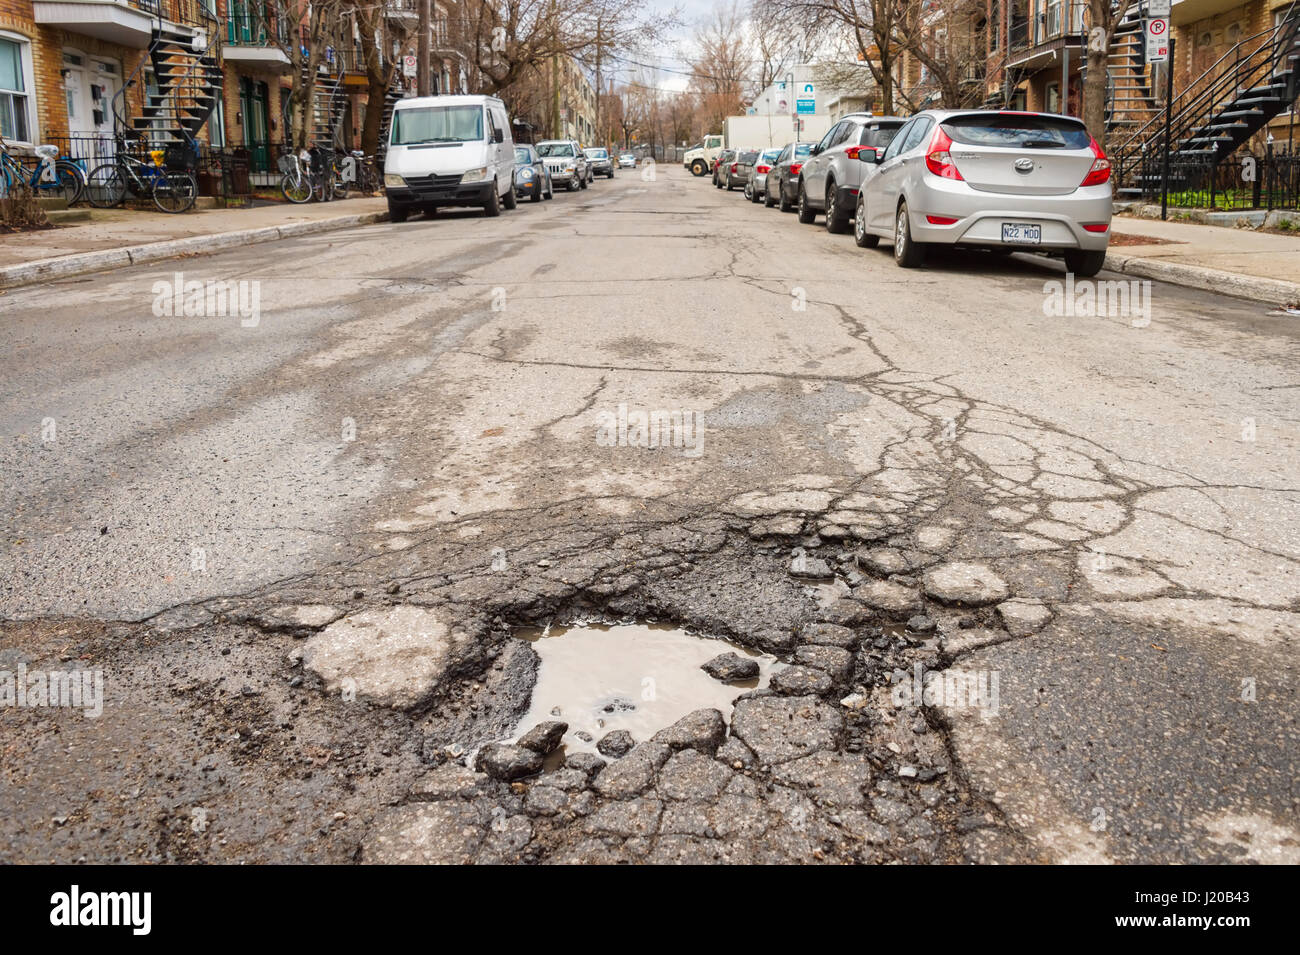 Montreal, Canada - 21 April 2017: Large unrepaired pothole on Cartier street Stock Photo